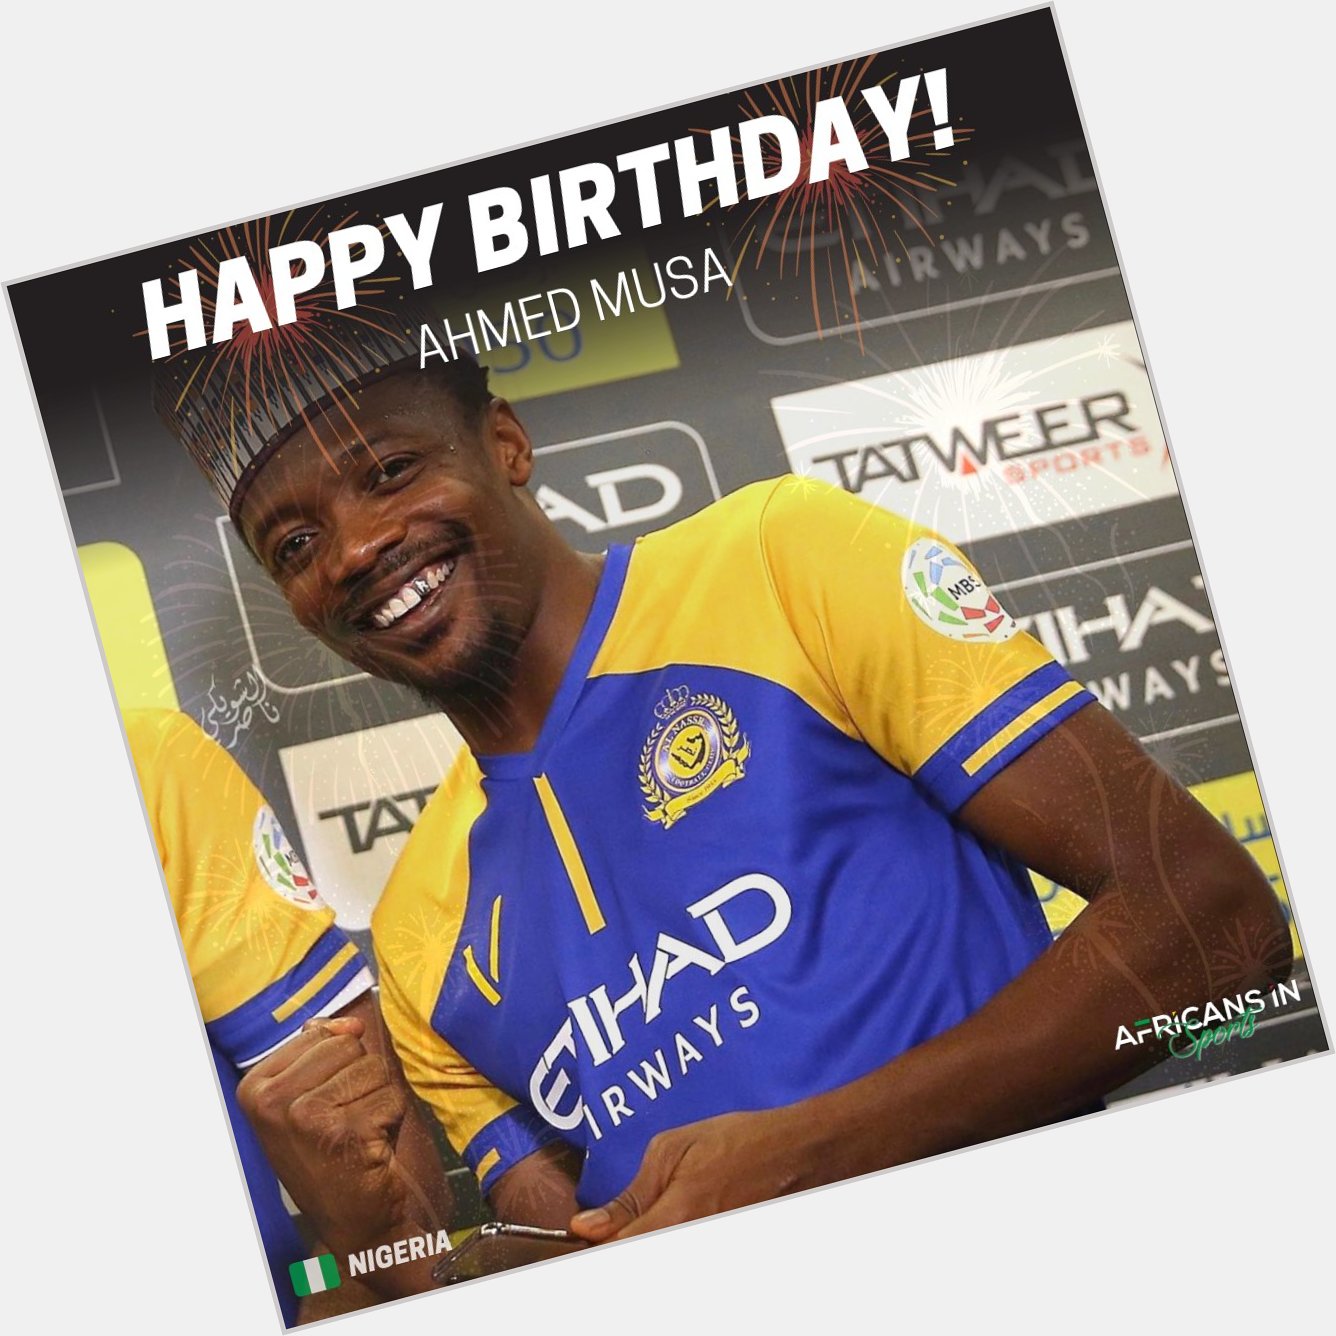 Happy Birthday to Nigerian professional footballer, Ahmed Musa  -
Send him love via the comment section 